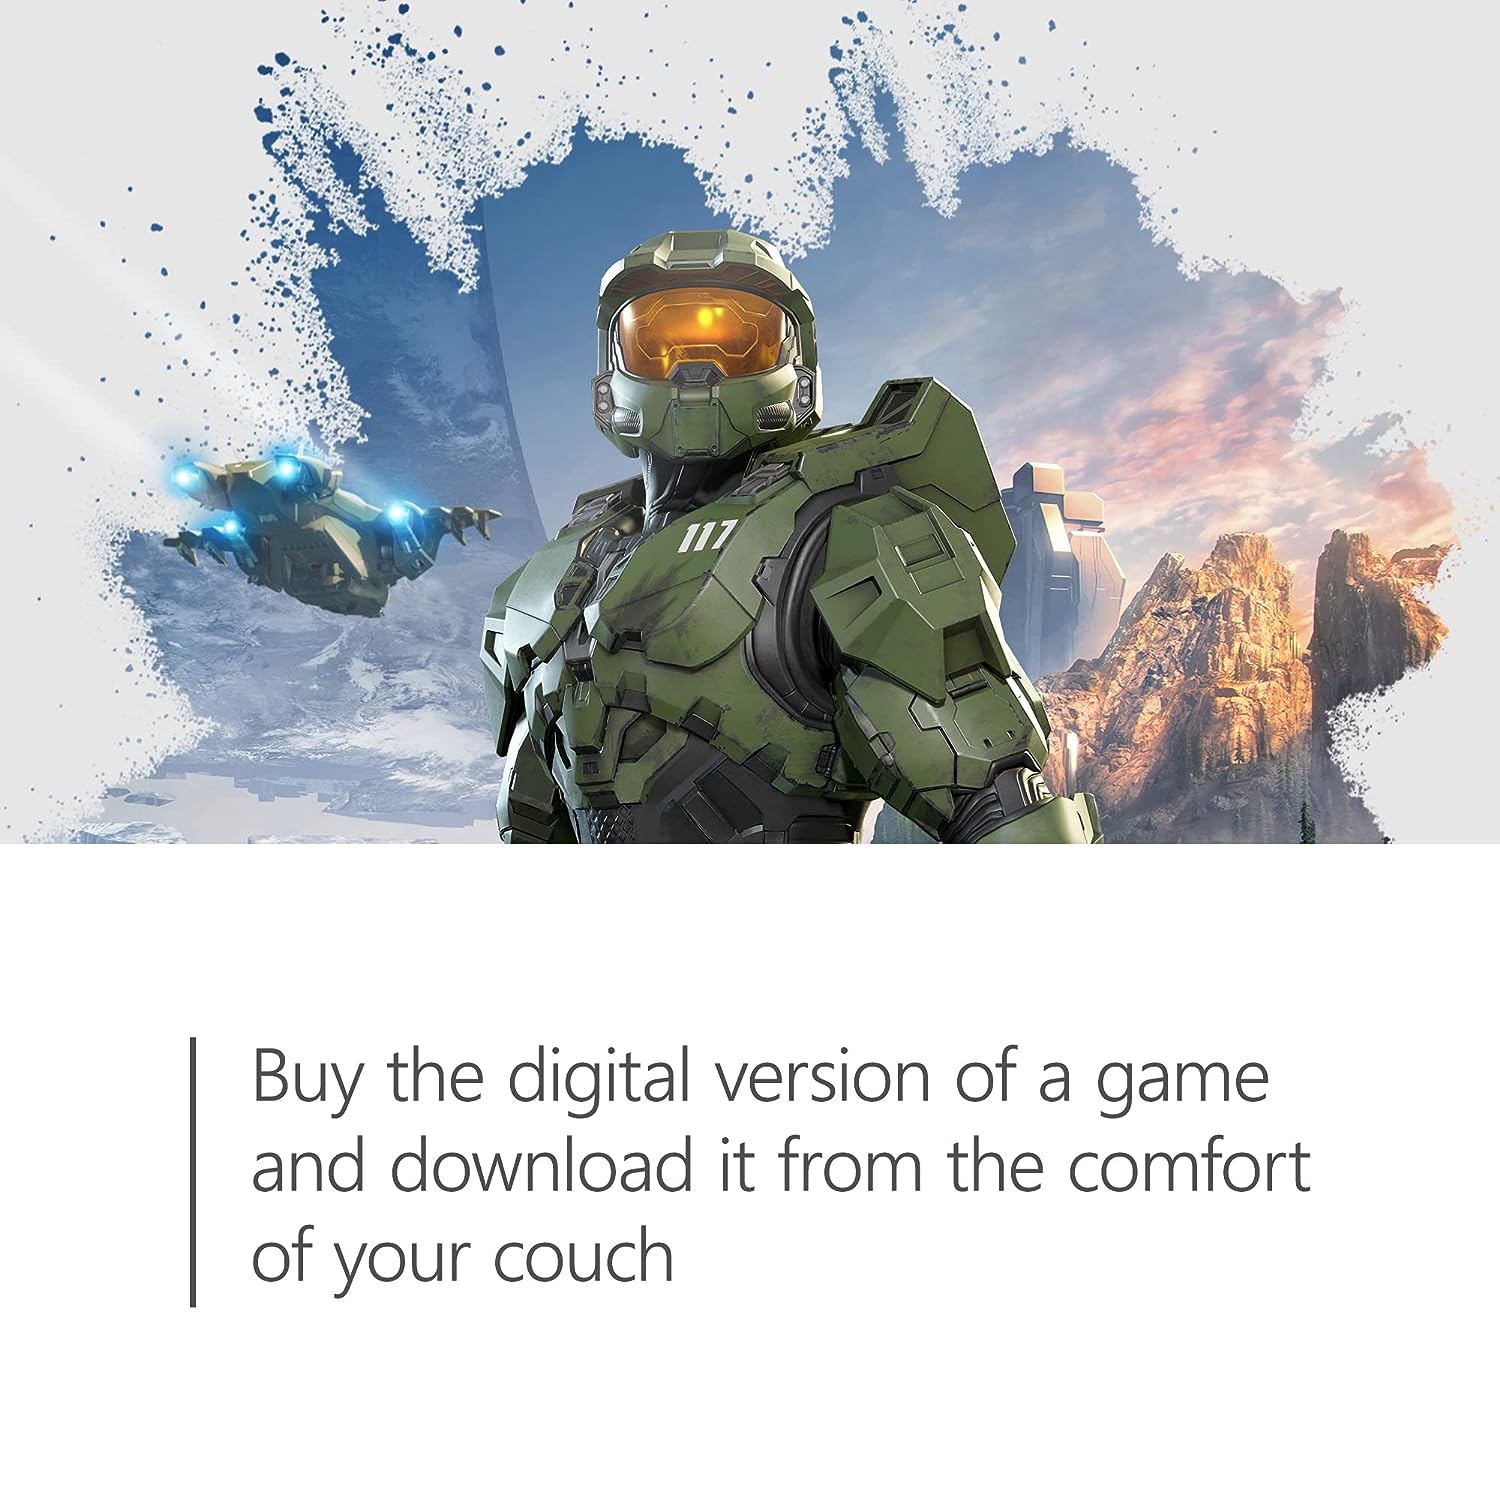 $25 Xbox Digital Gift Card | Buy the digital version of a game and download it from the comfort of your couch.